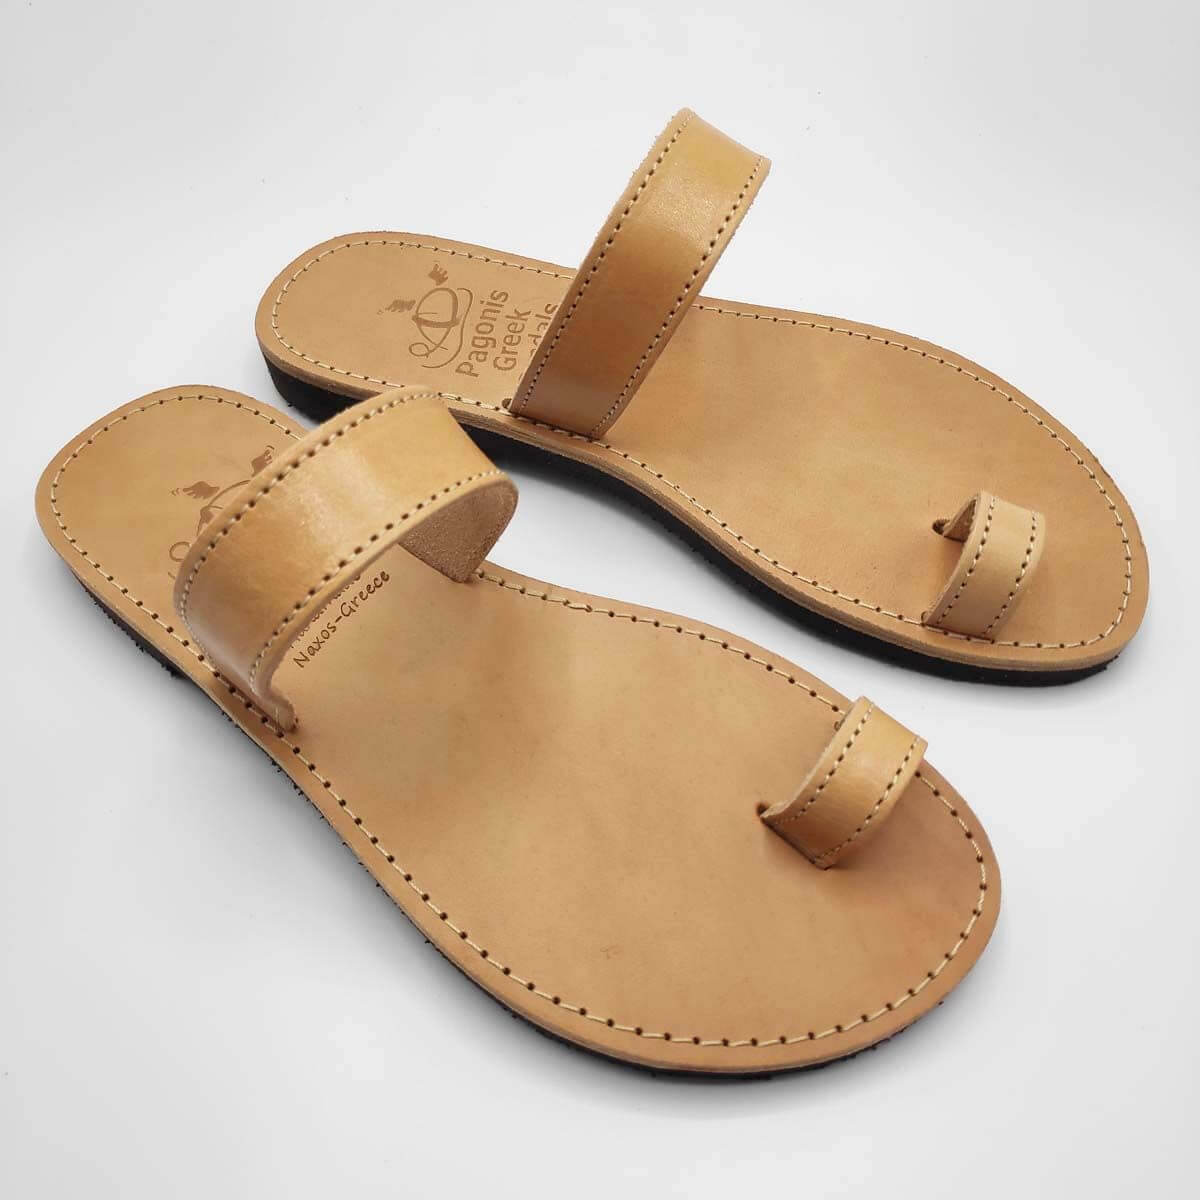 JESUS sandals with toe ring | Pagonis Greek Sandals